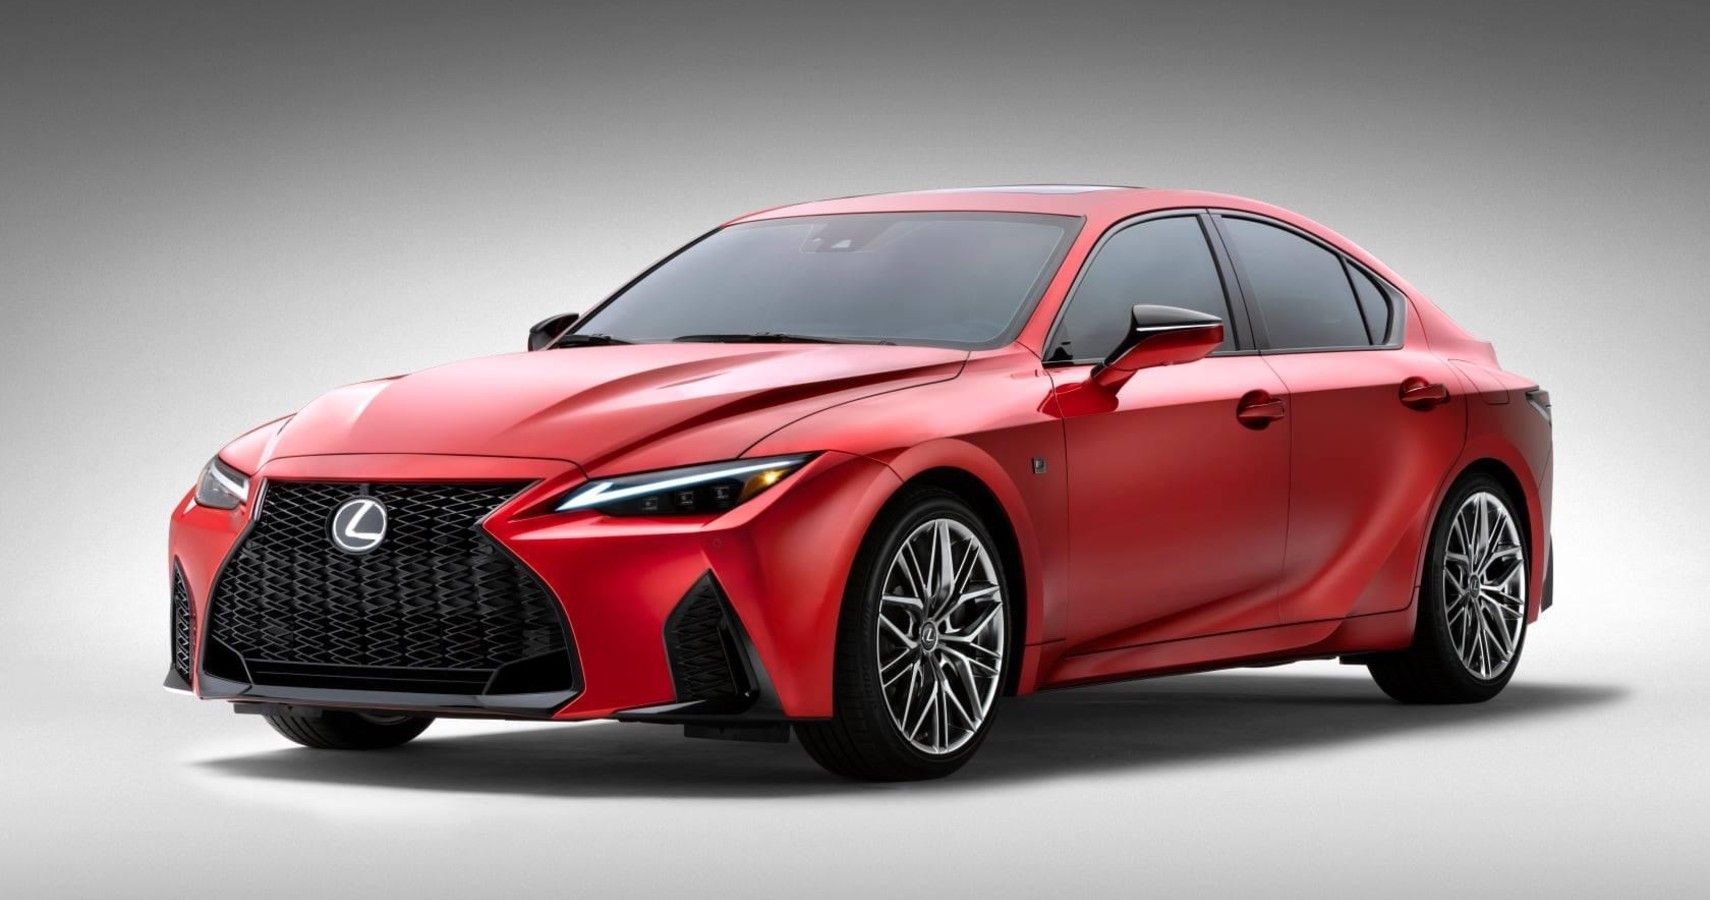 As competitors move to smaller engines, Lexus puts a V8 in their compact car